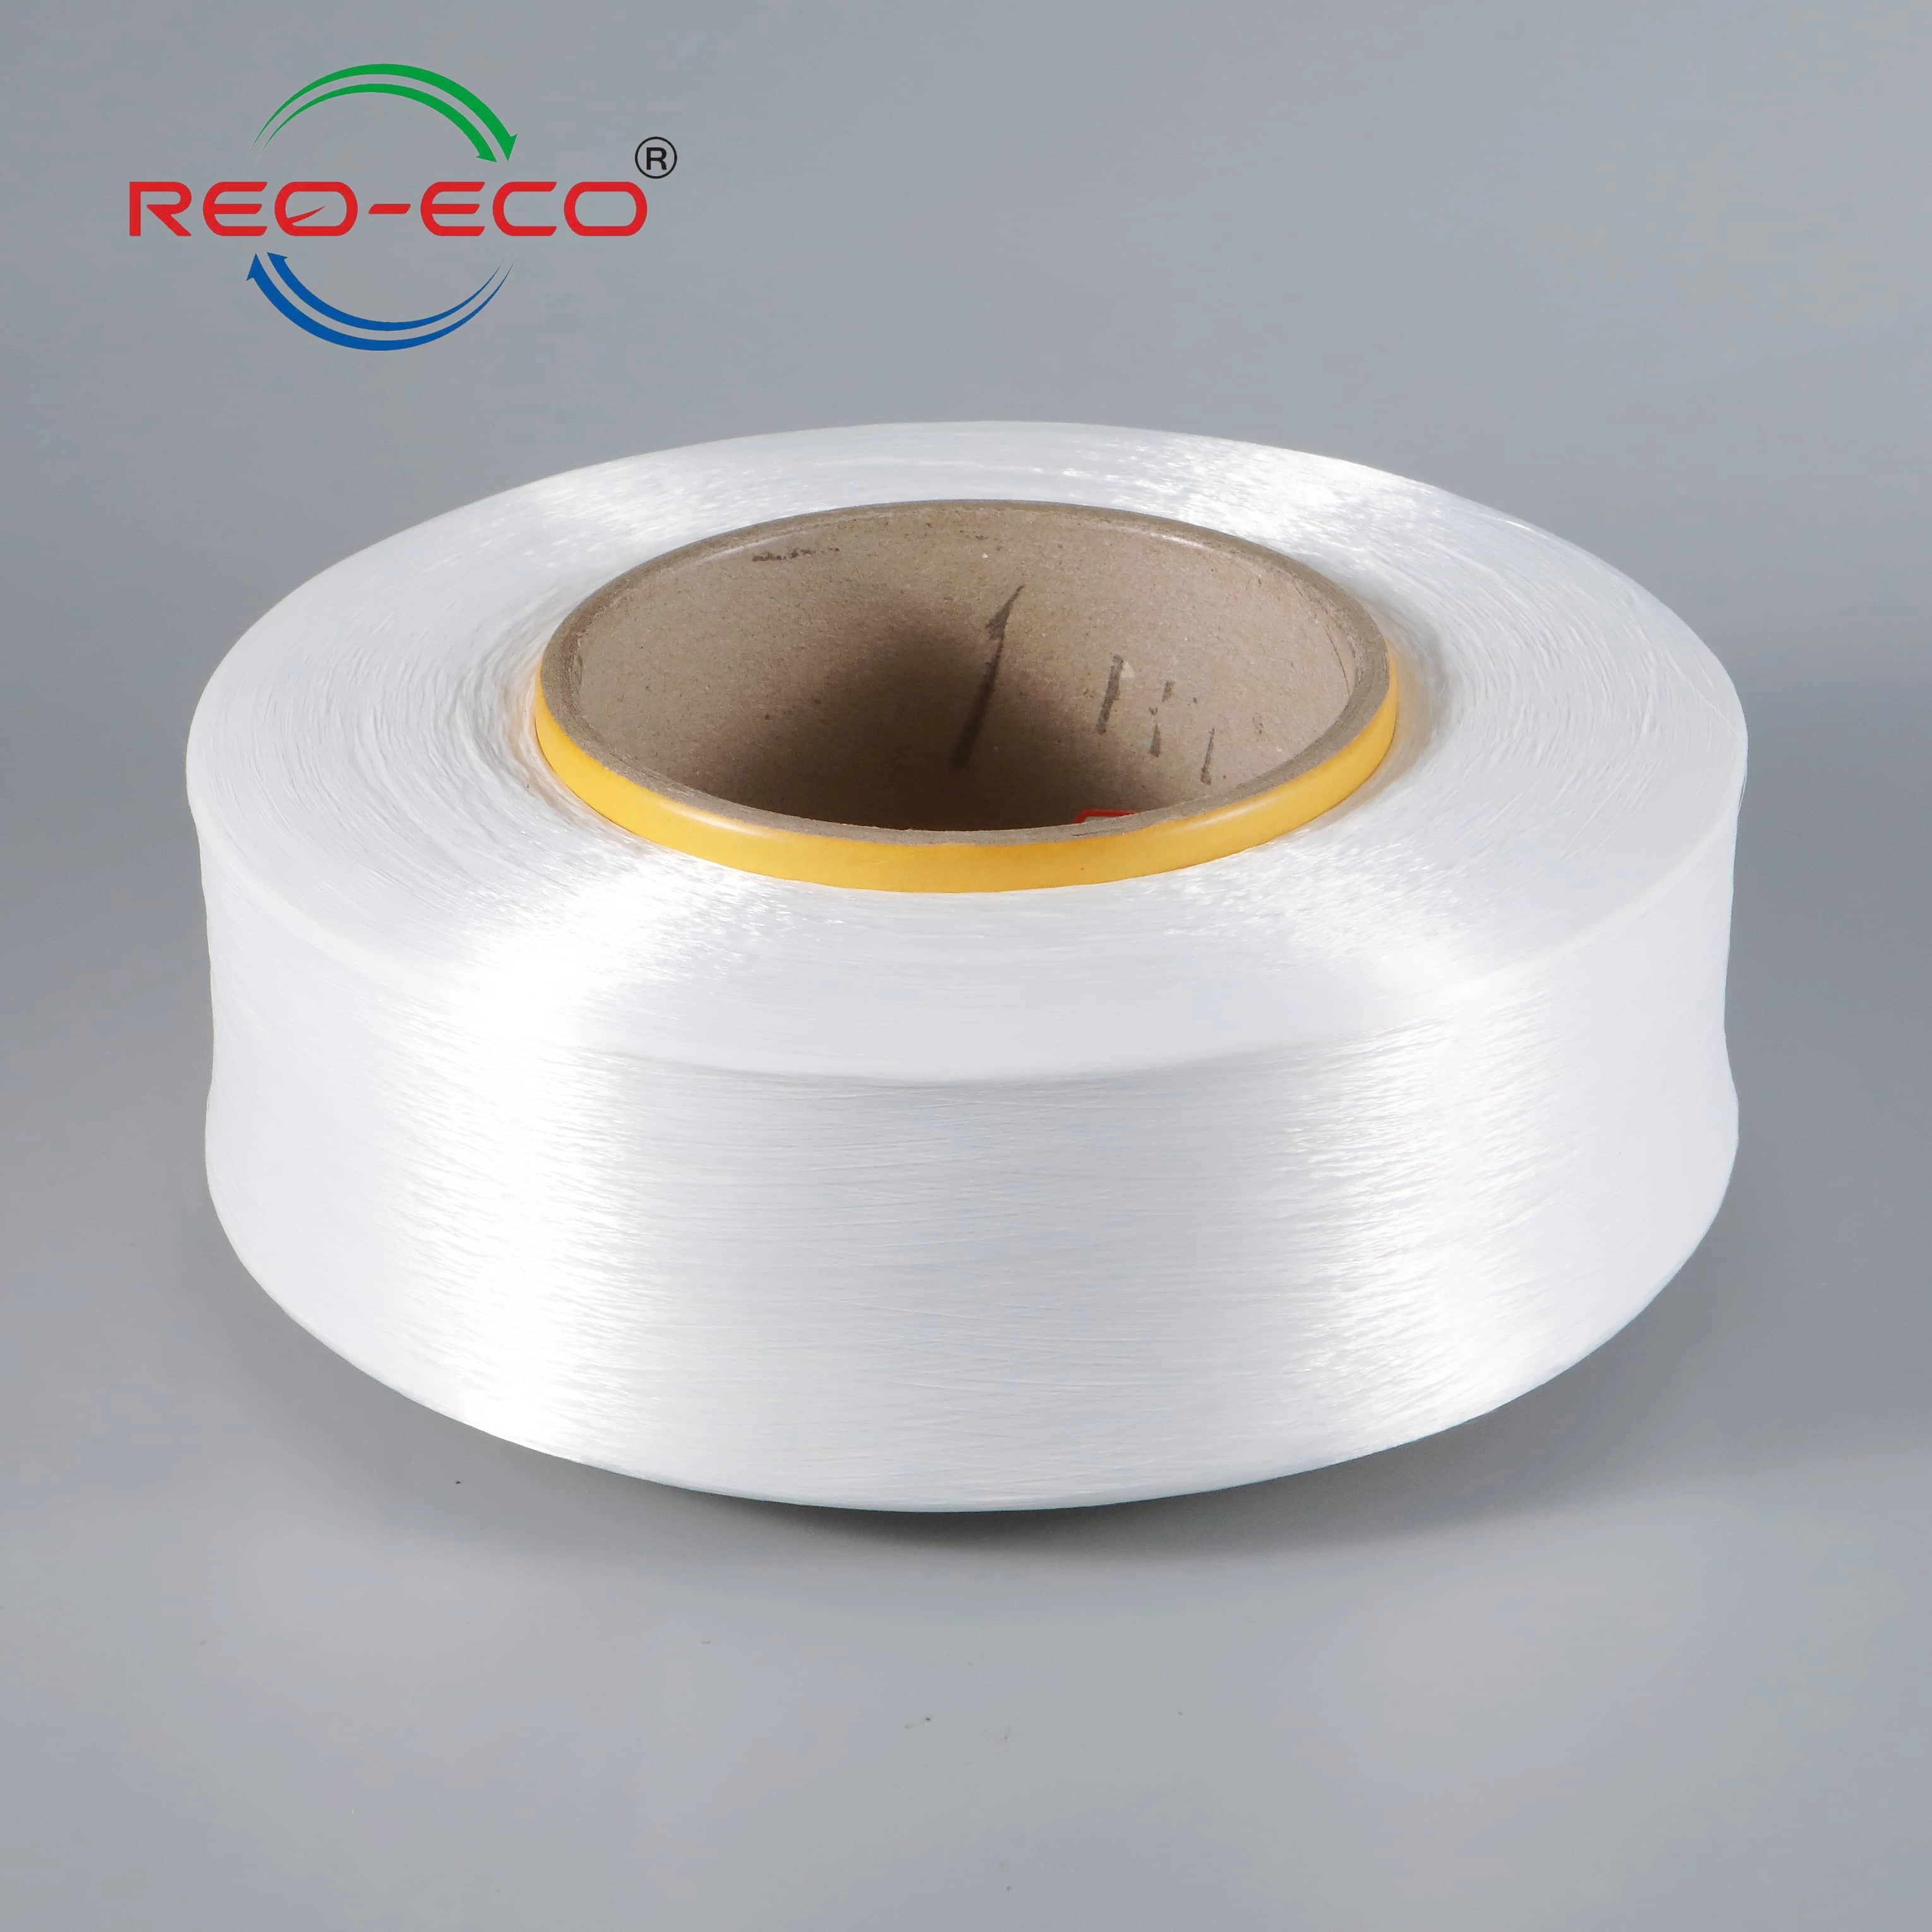 Grs Certification 100d/96f DTY Reo-Eco 100% Recycled Polyester Filament Yarn